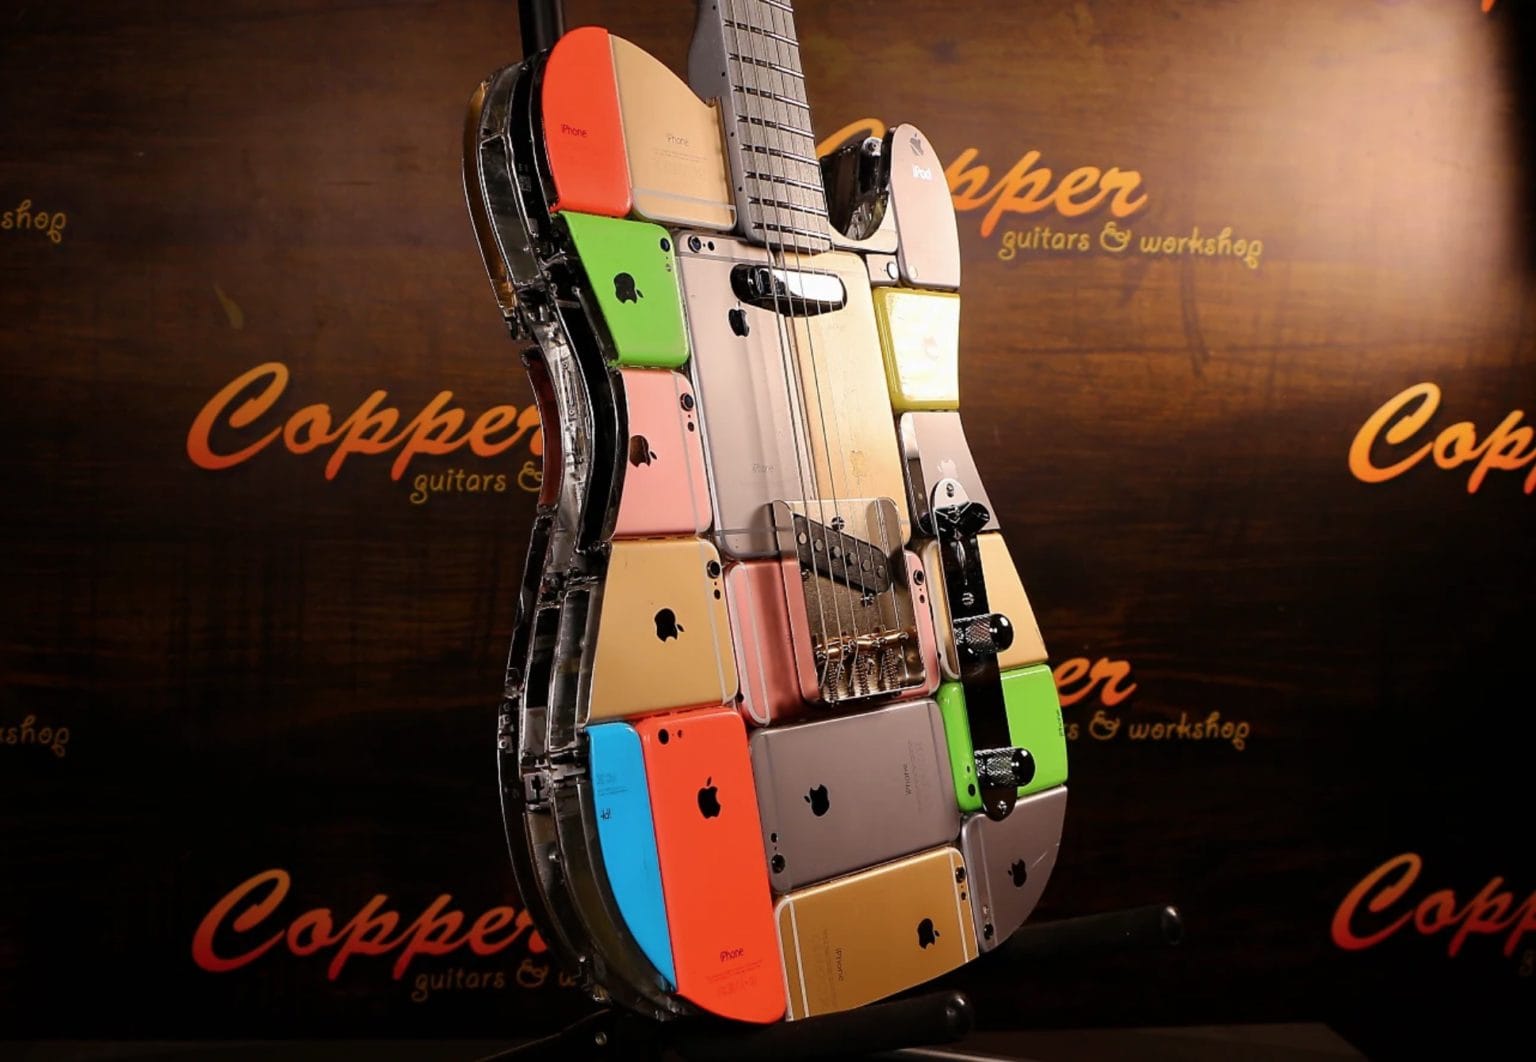 This custom iPhone guitar from Copper Guitars is the most rockin' iPhone mod ever.